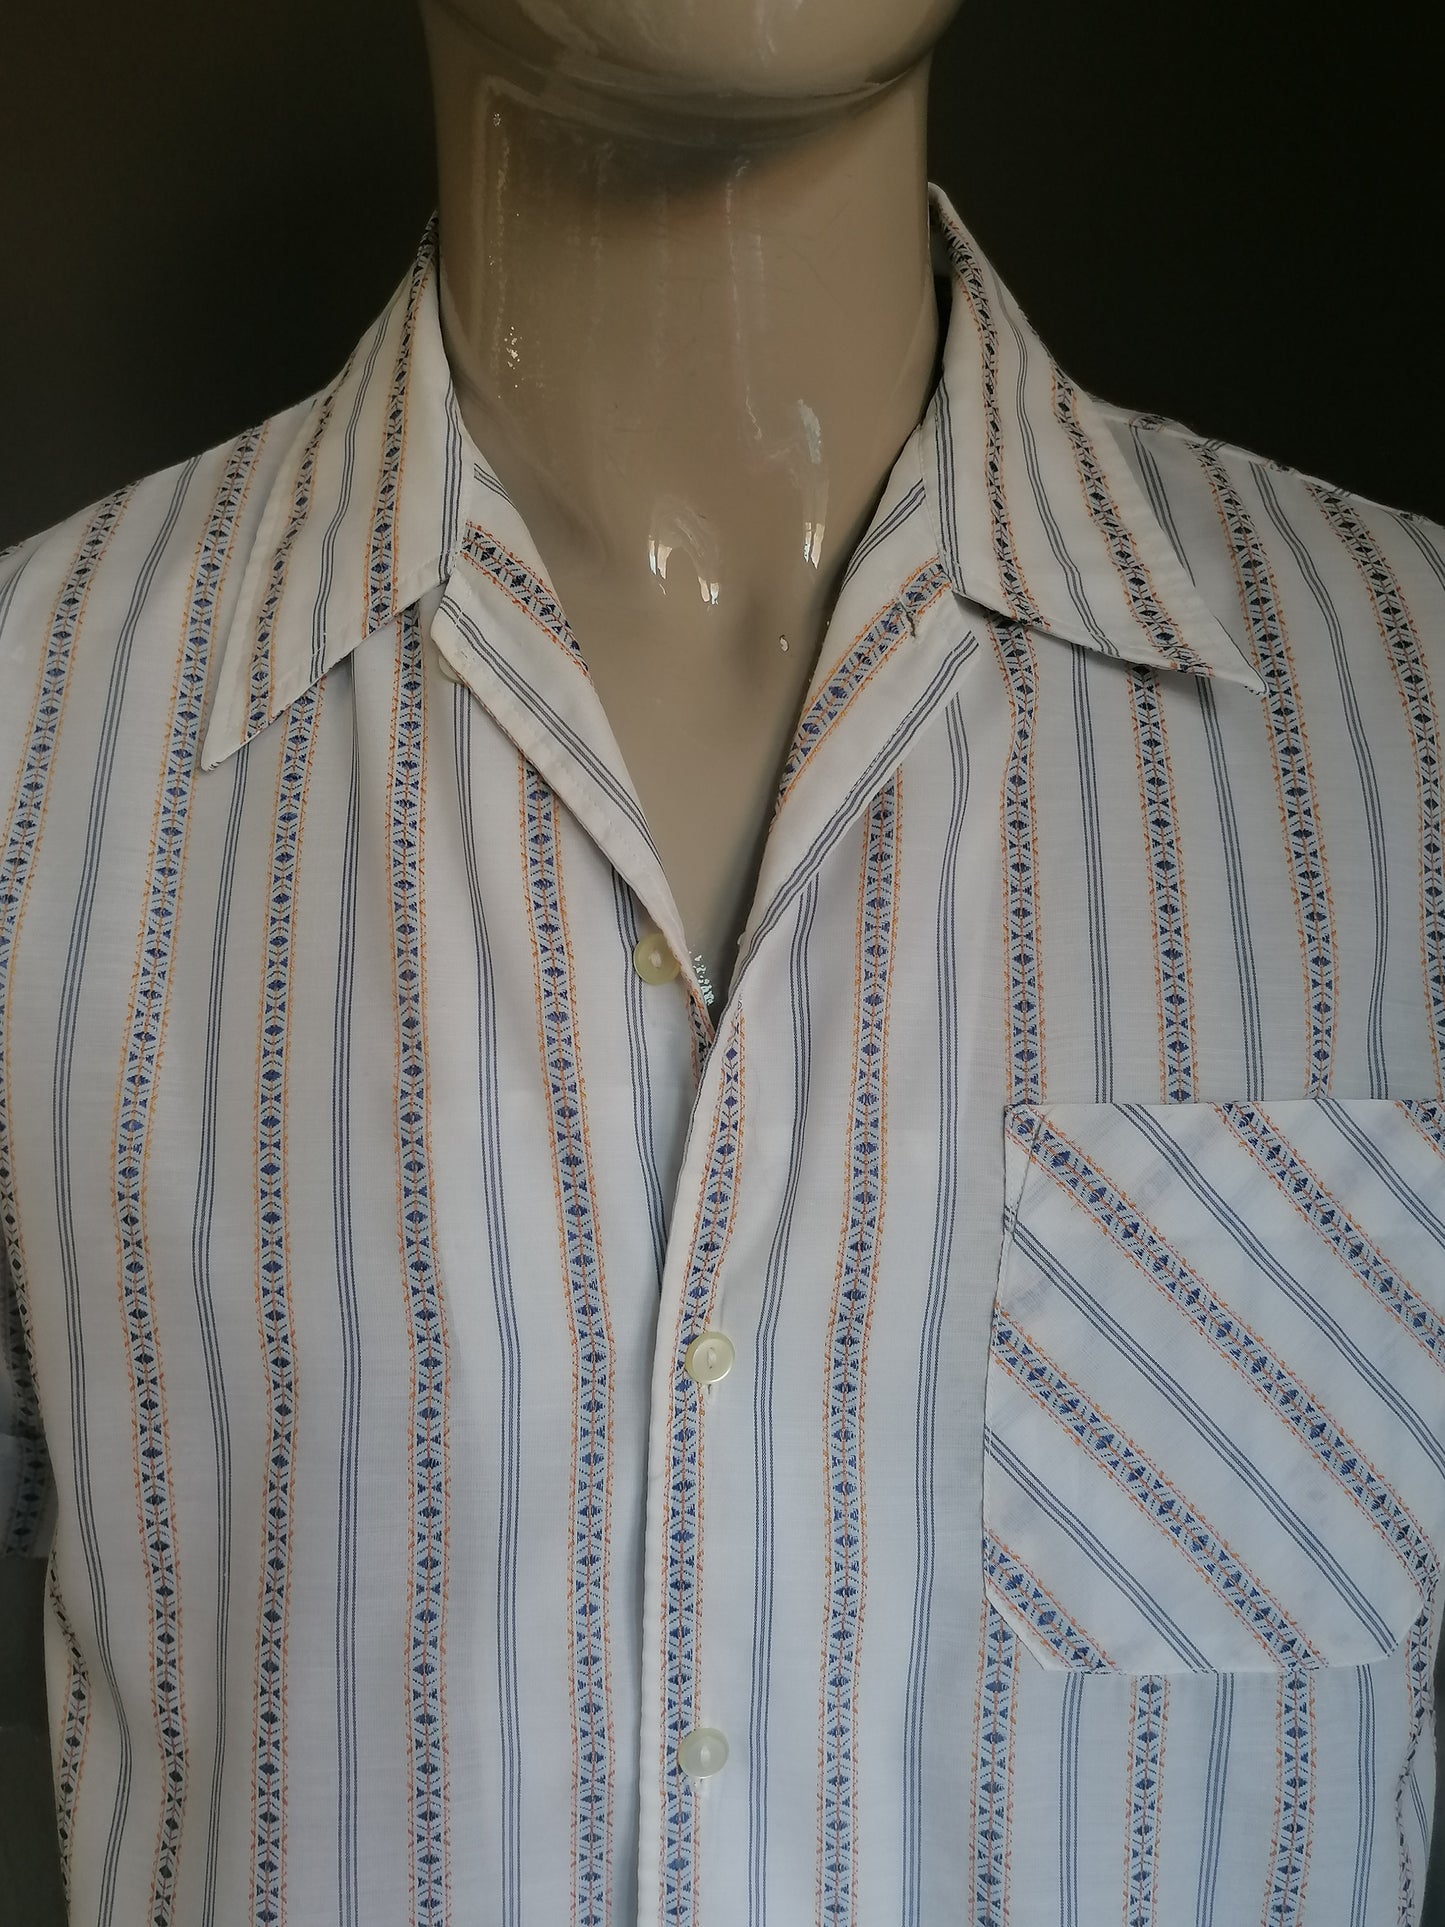 Vintage 70's shirt short sleeve with point collar. Beige blue yellow striped. Size XL.